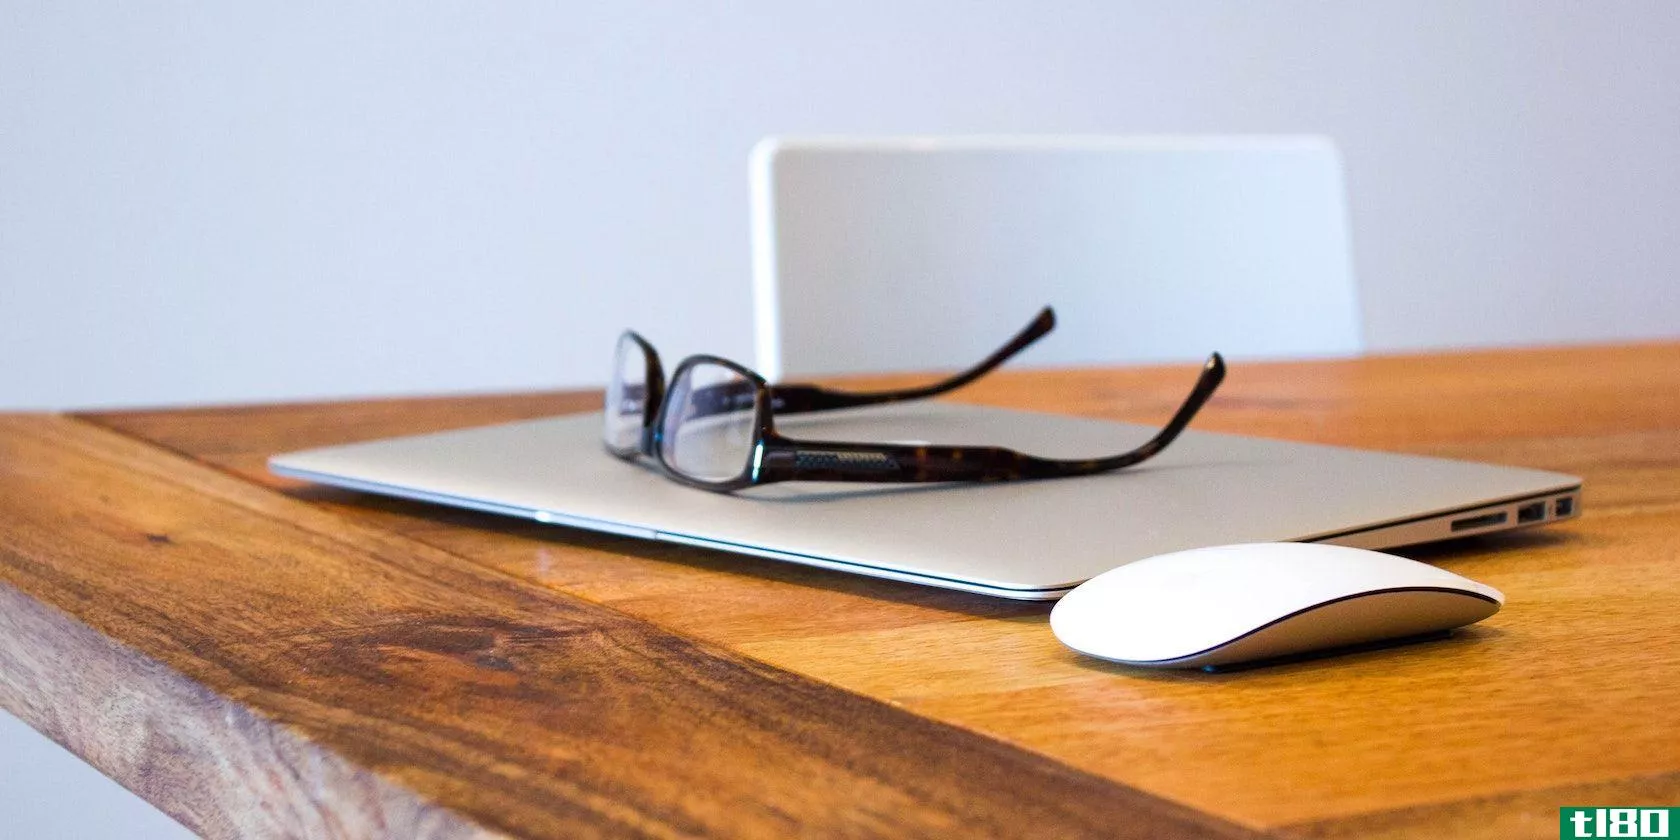 A photograph of a pair of spectacles sitting on top of a closed Macbook